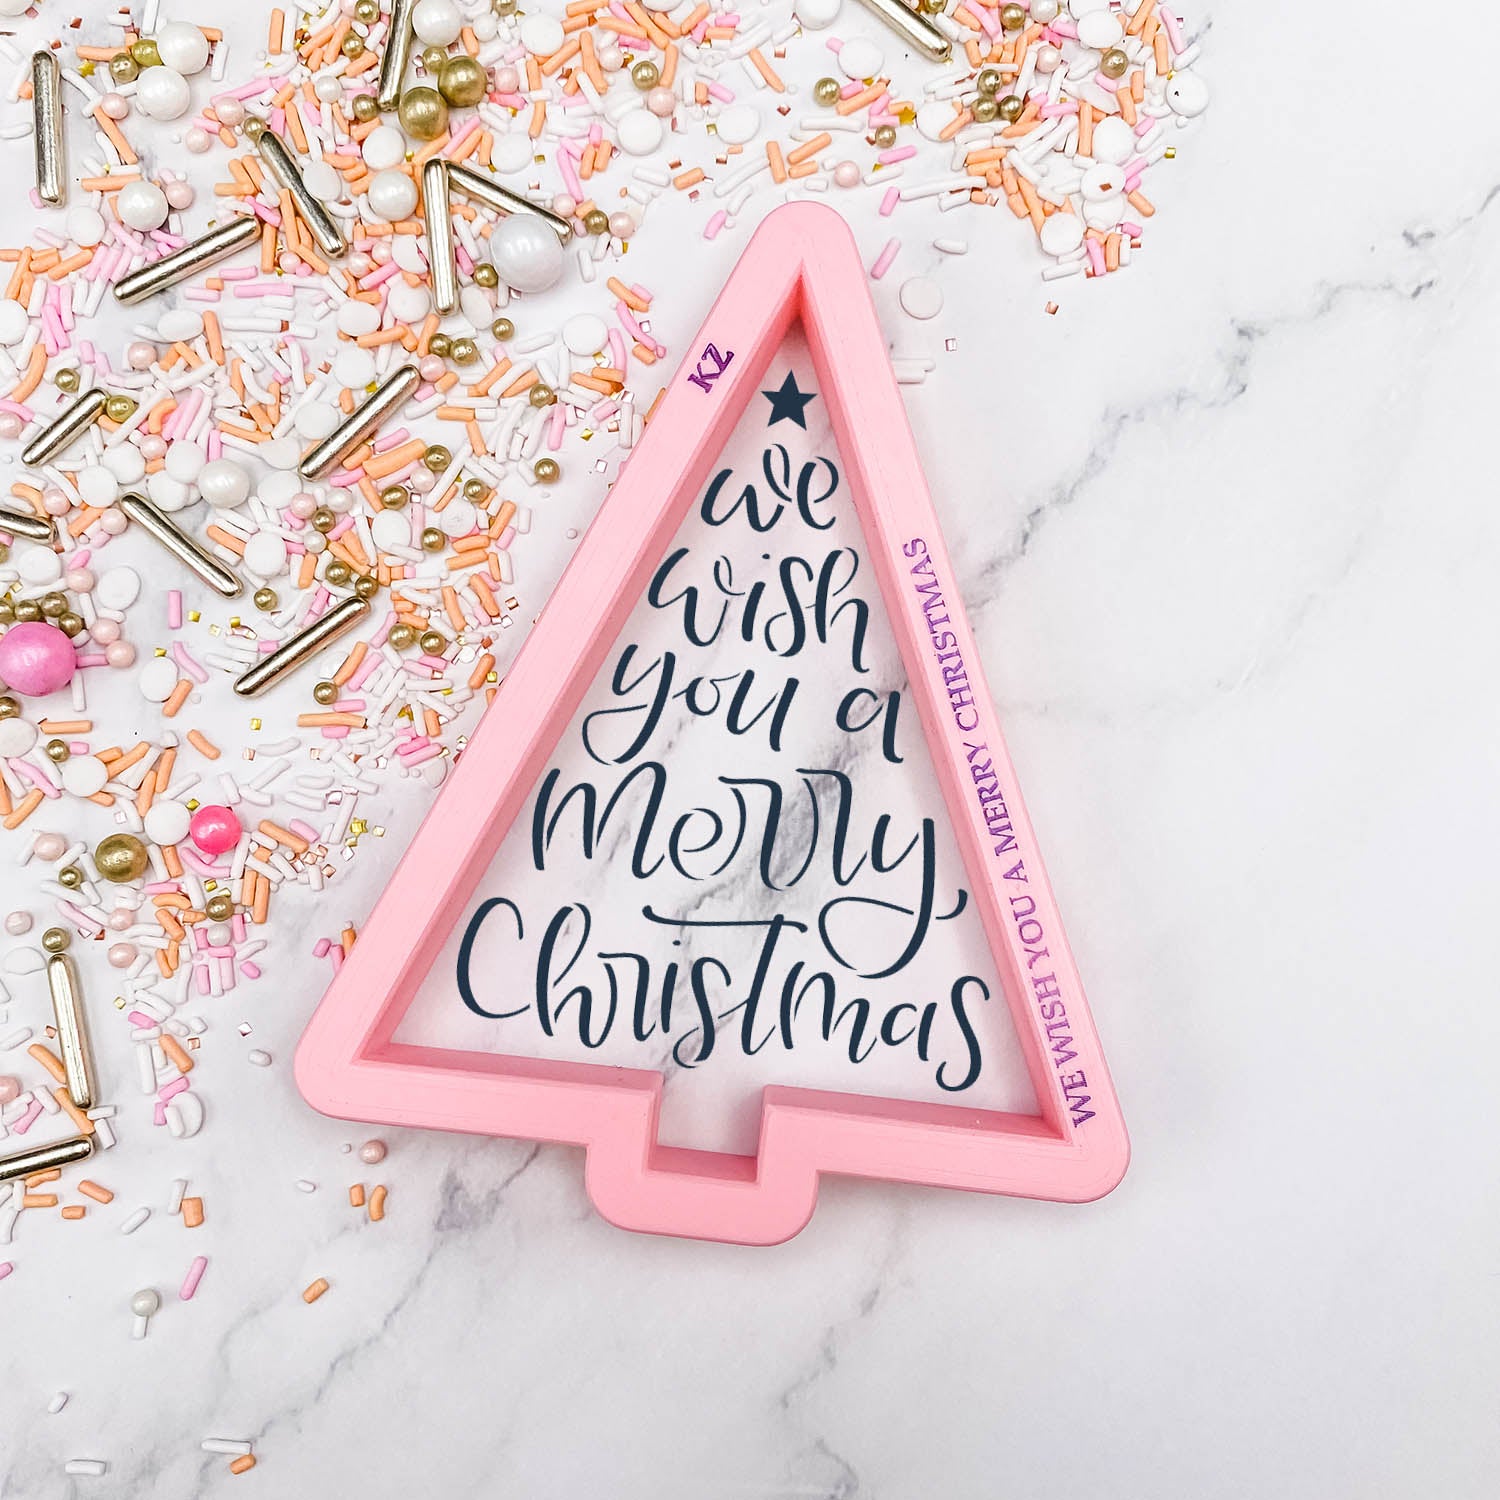 We Wish You A Merry Christmas Hand Lettered